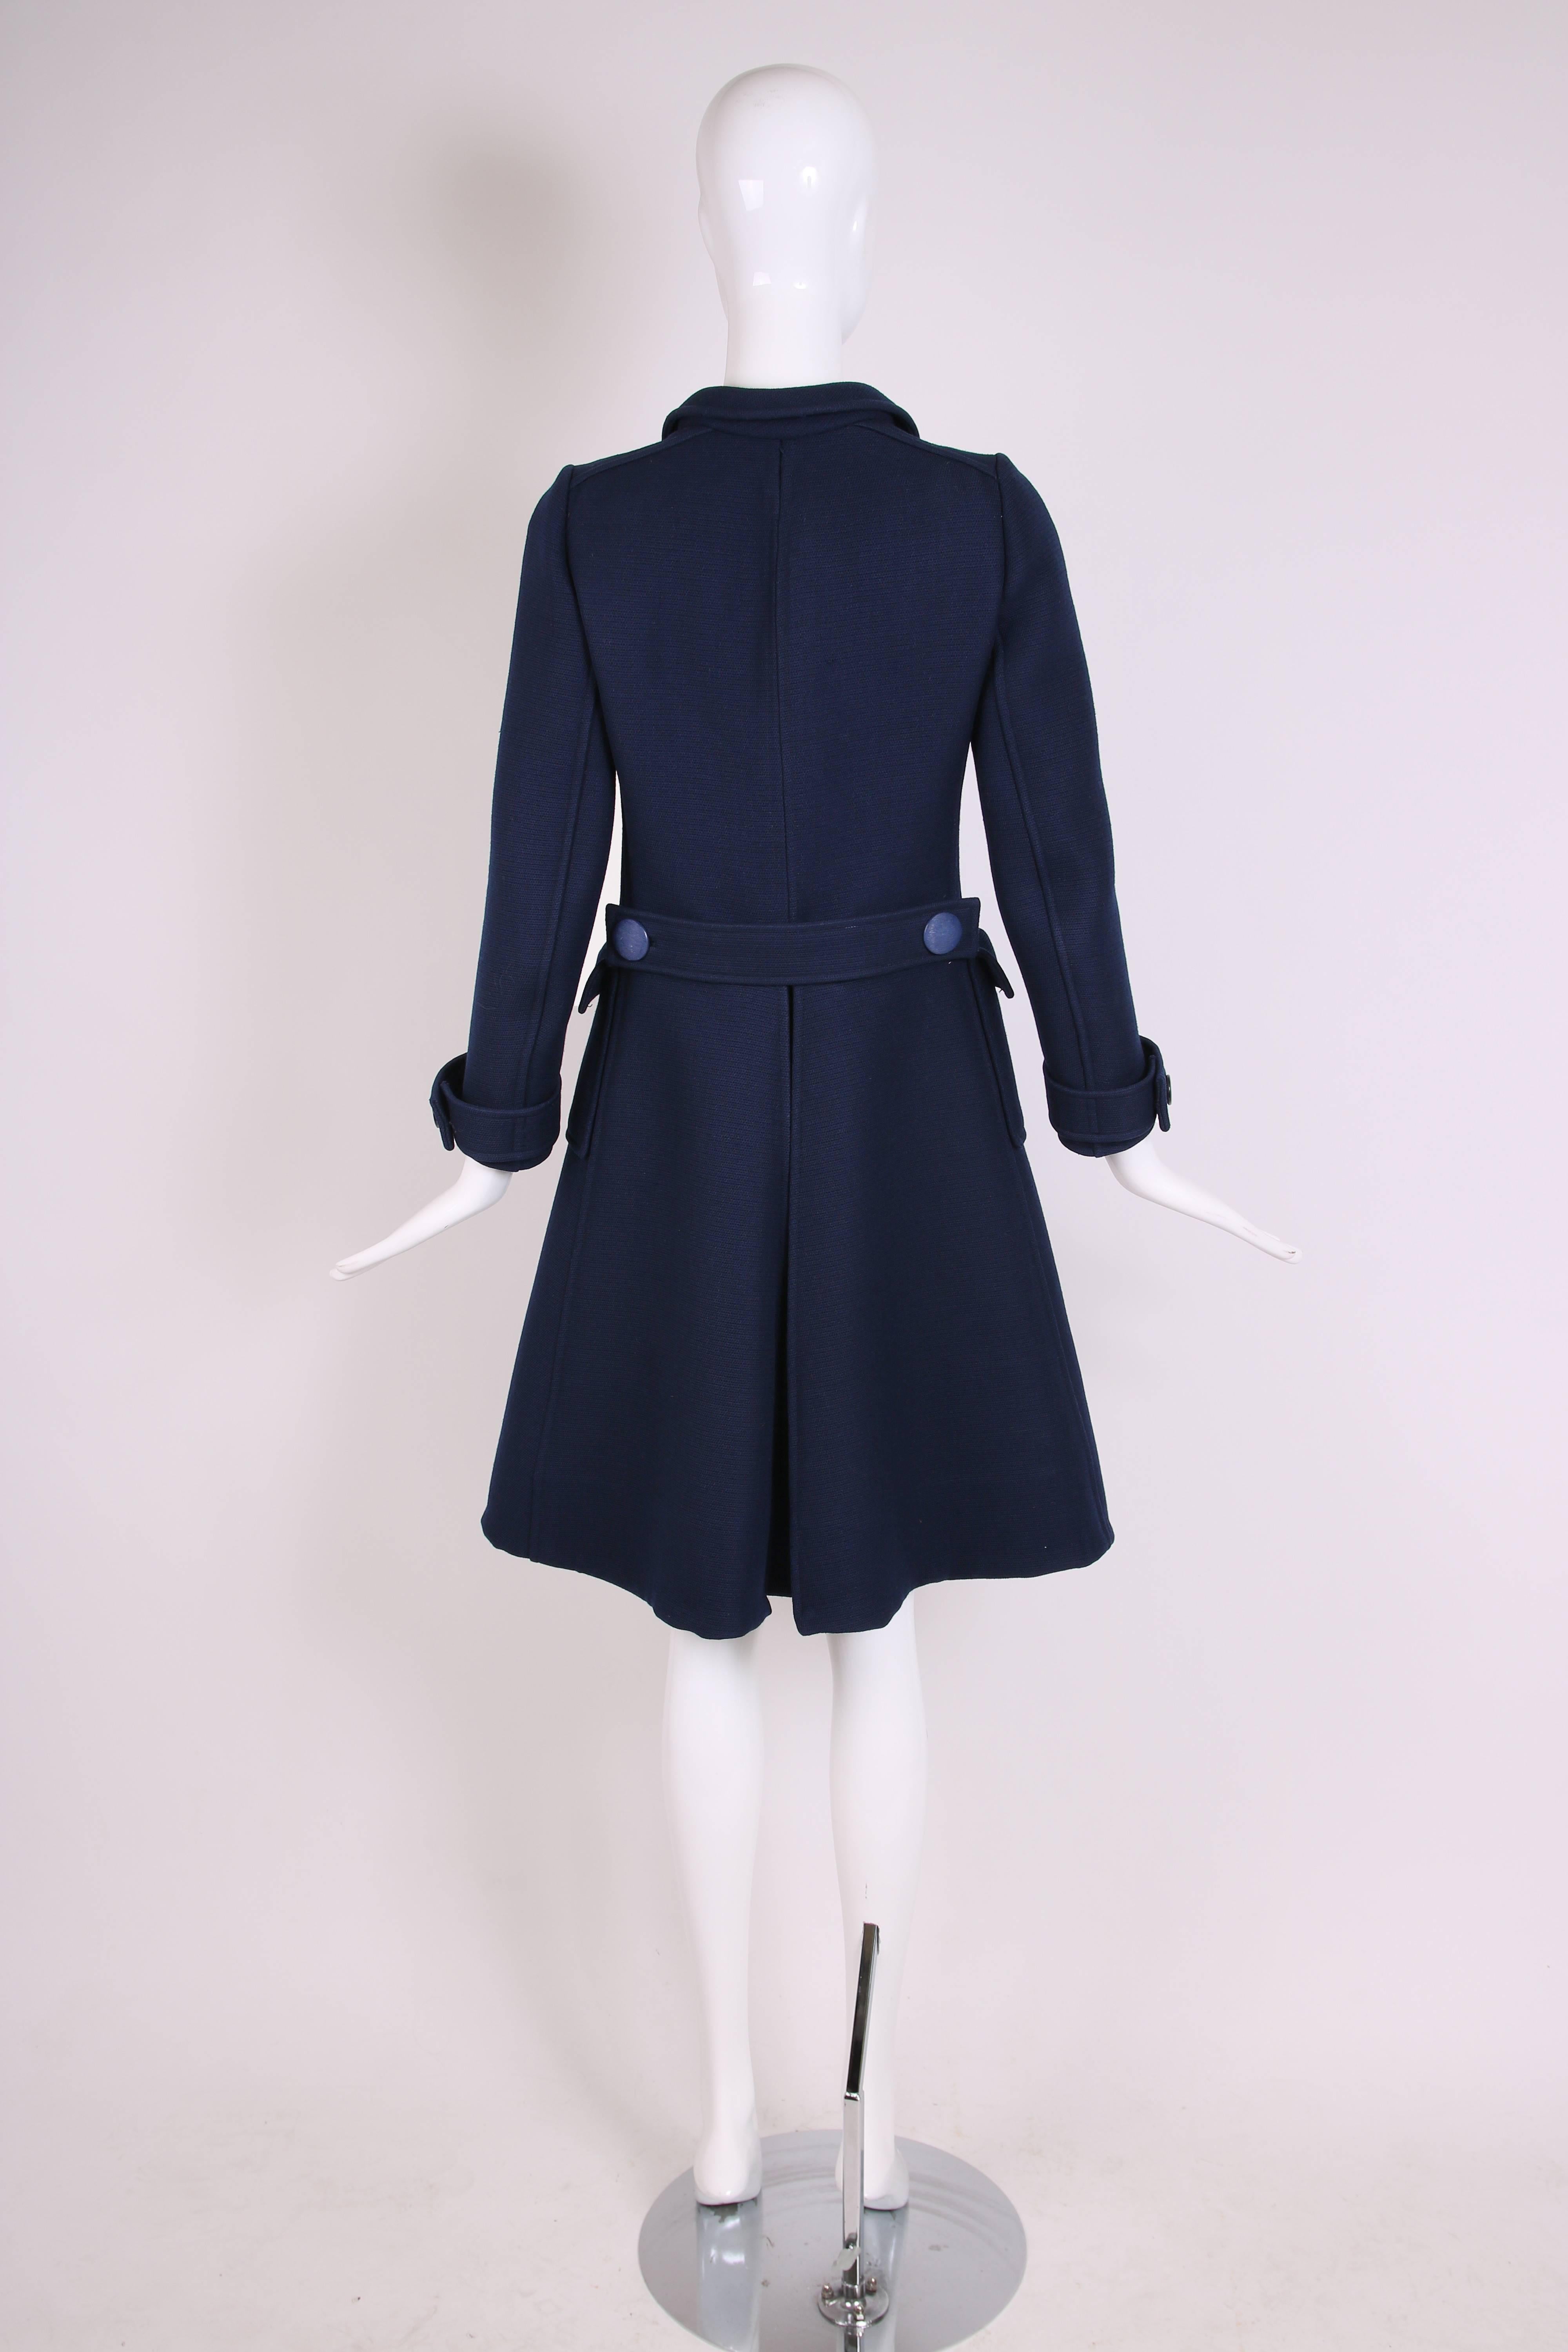 Women's 1960's Courreges for Bonwit Teller Navy Mod Space Age Wool Double-Breasted Coat